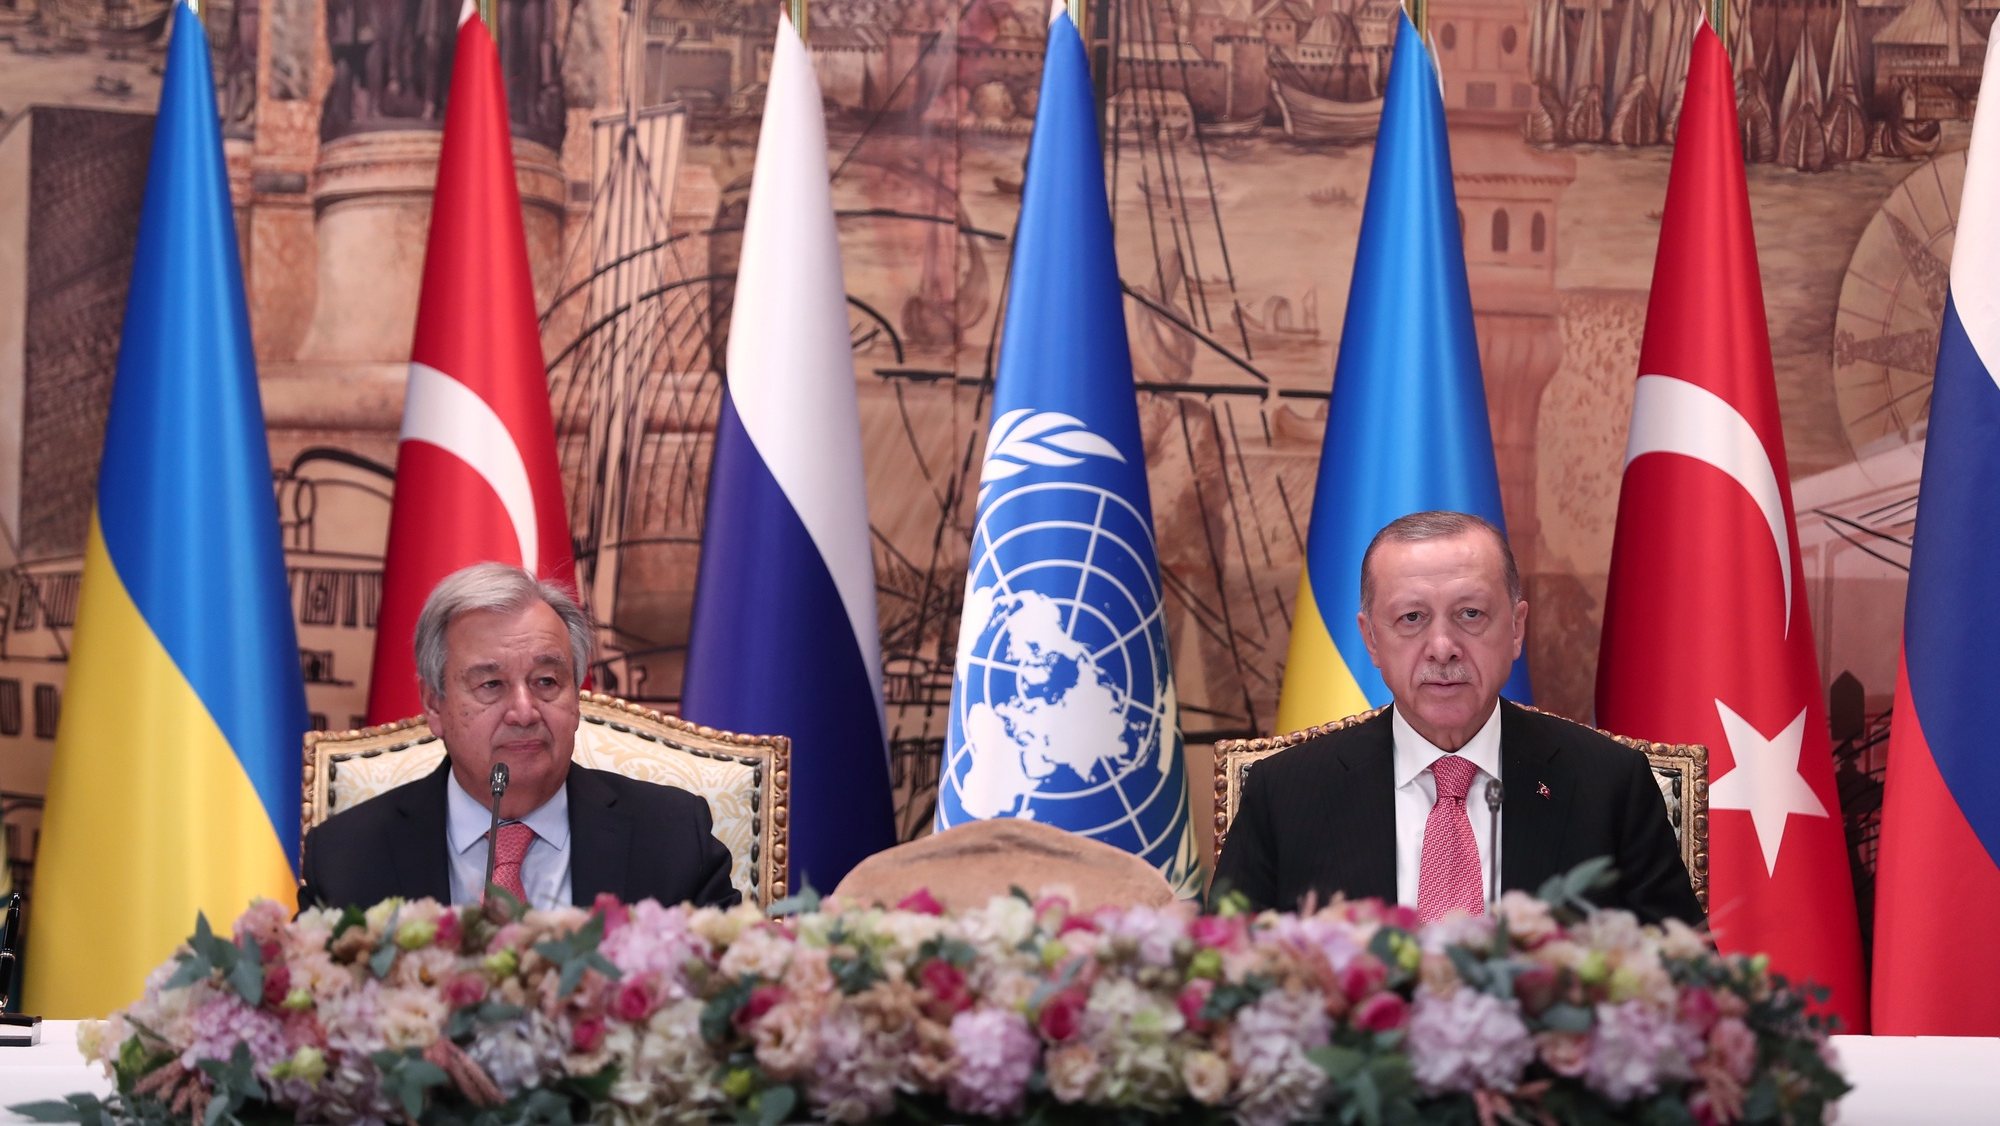 epa10086366 Turkish President Recep Tayyip Erdogan (R) and UN Secretary-General Antonio Guterres (L) attend a signing ceremony of the grain shipment agreement between Turkey-UN, Russia and Ukraine, after their meeting in Istanbul, Turkey, 22 July 2022. According to the agreement, a coordination center will be established to carry out joint inspections at the ports and ensure route security.  EPA/SEDAT SUNA